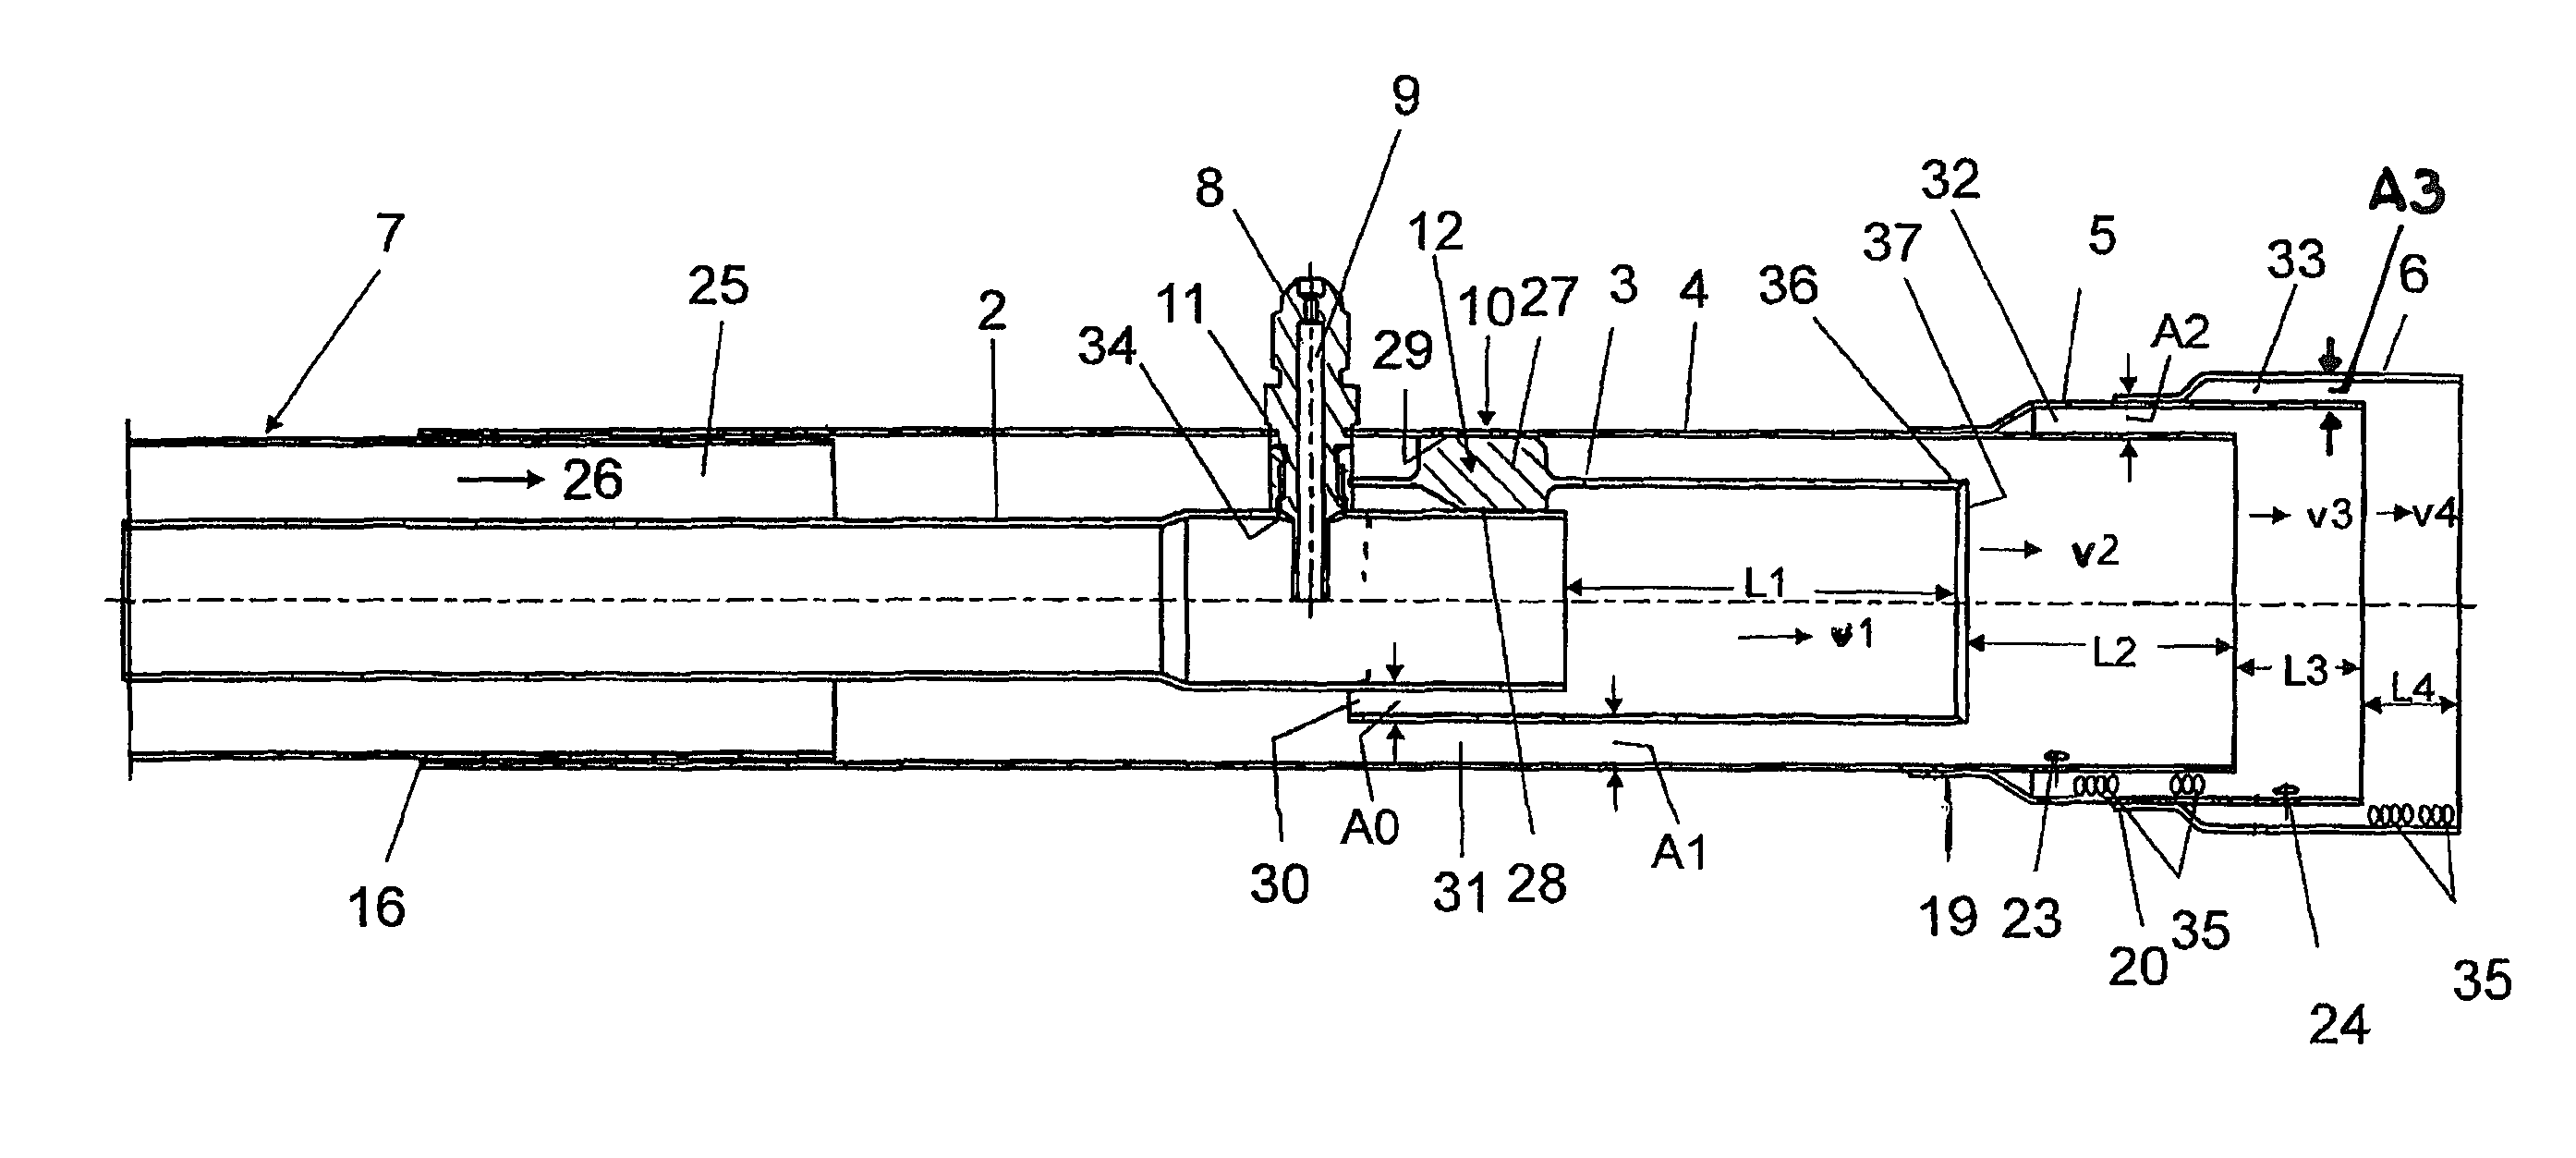 Apparatus for discharging sprays or mists, comprising an oscillating fire burner, and mist pipe for such an apparatus